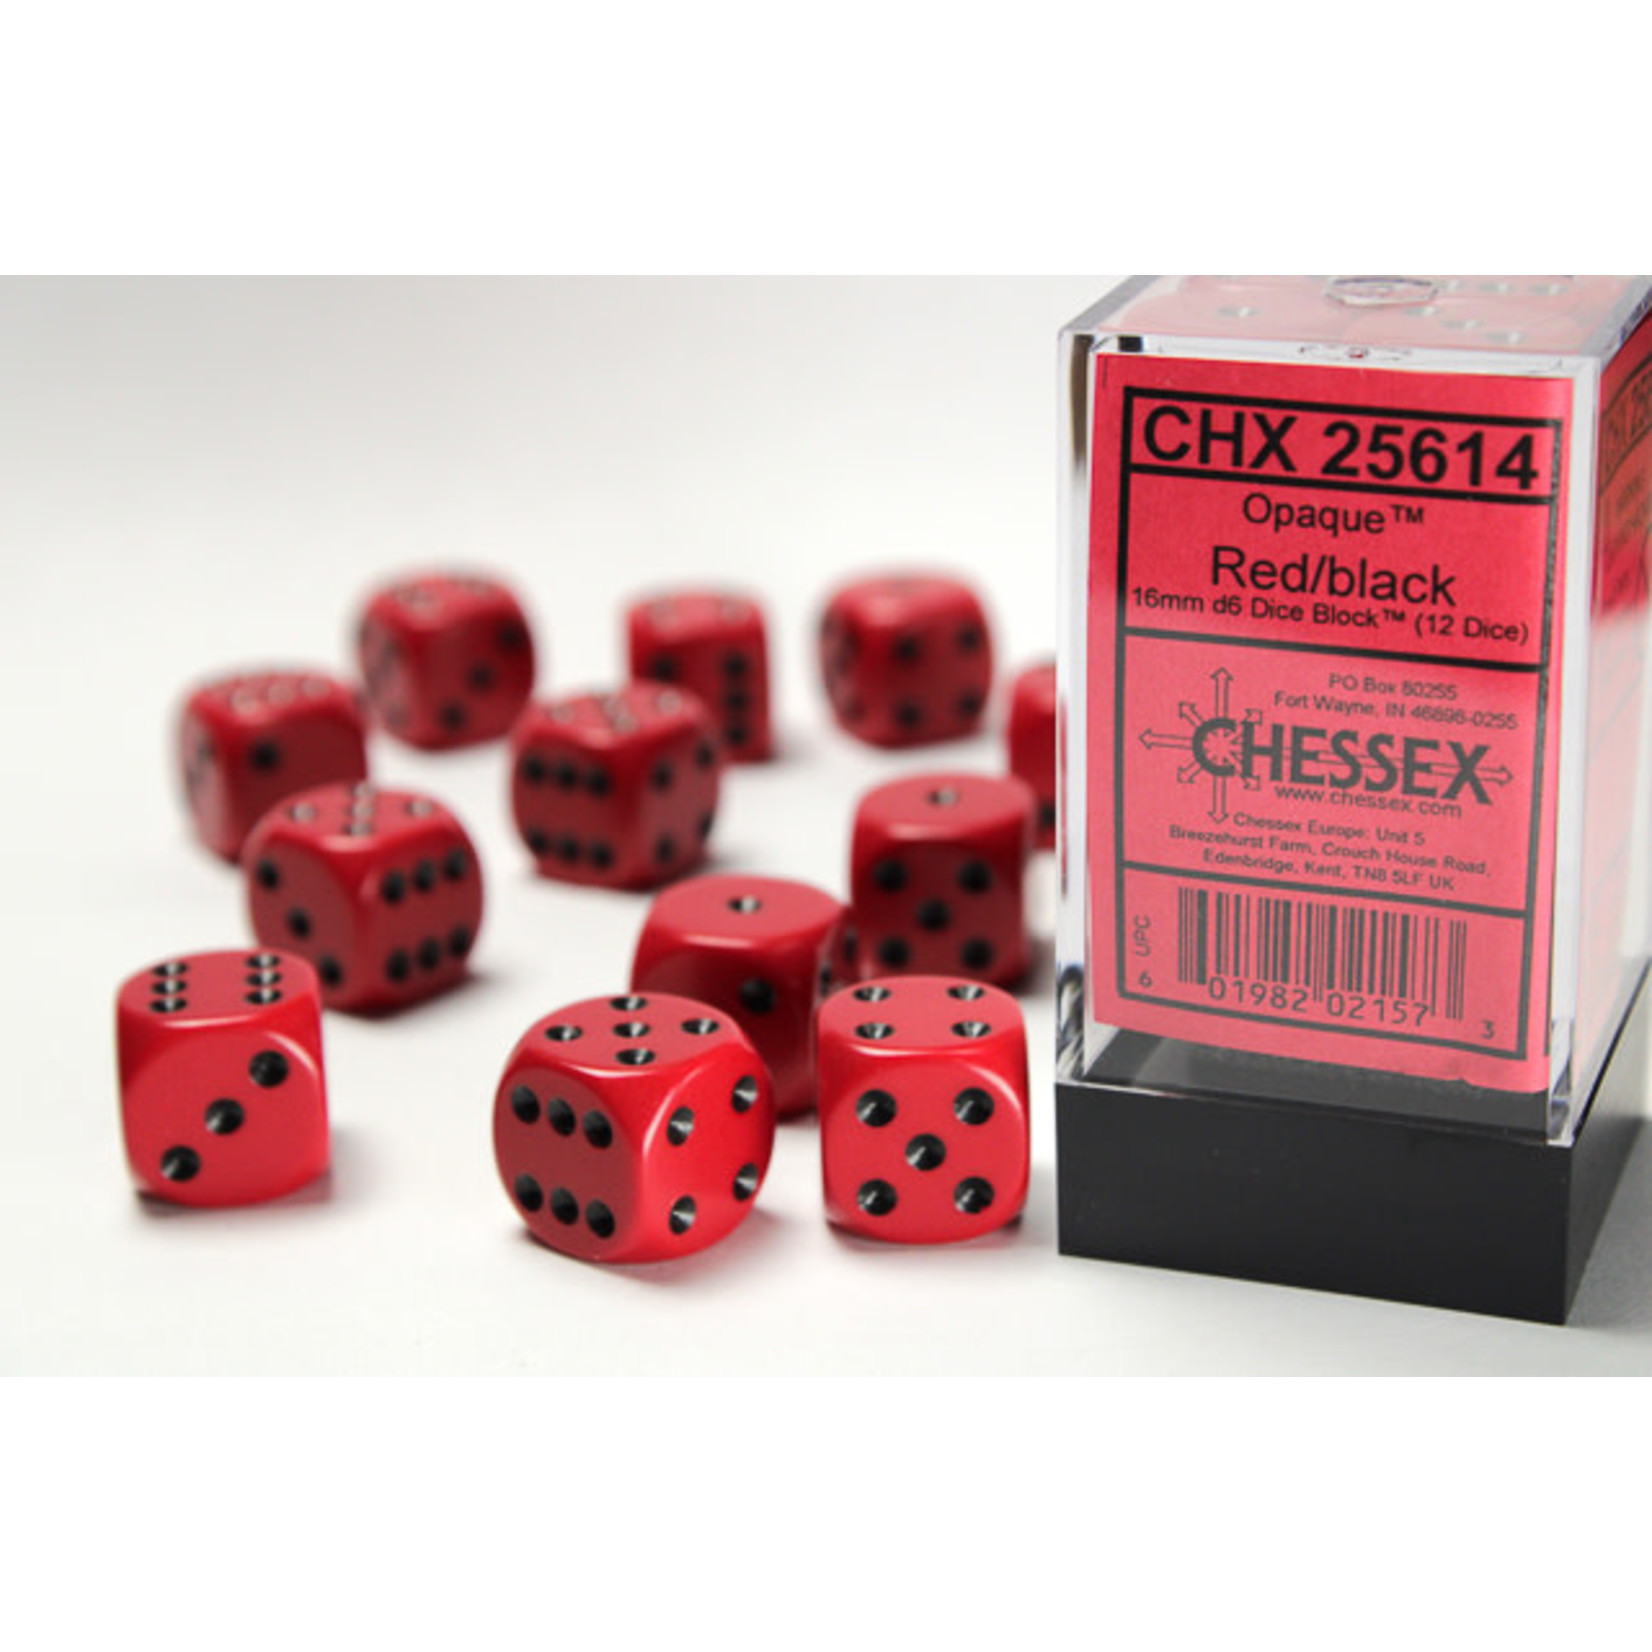 Chessex Dice 16mm 25614 12pc Opaque Red/Black